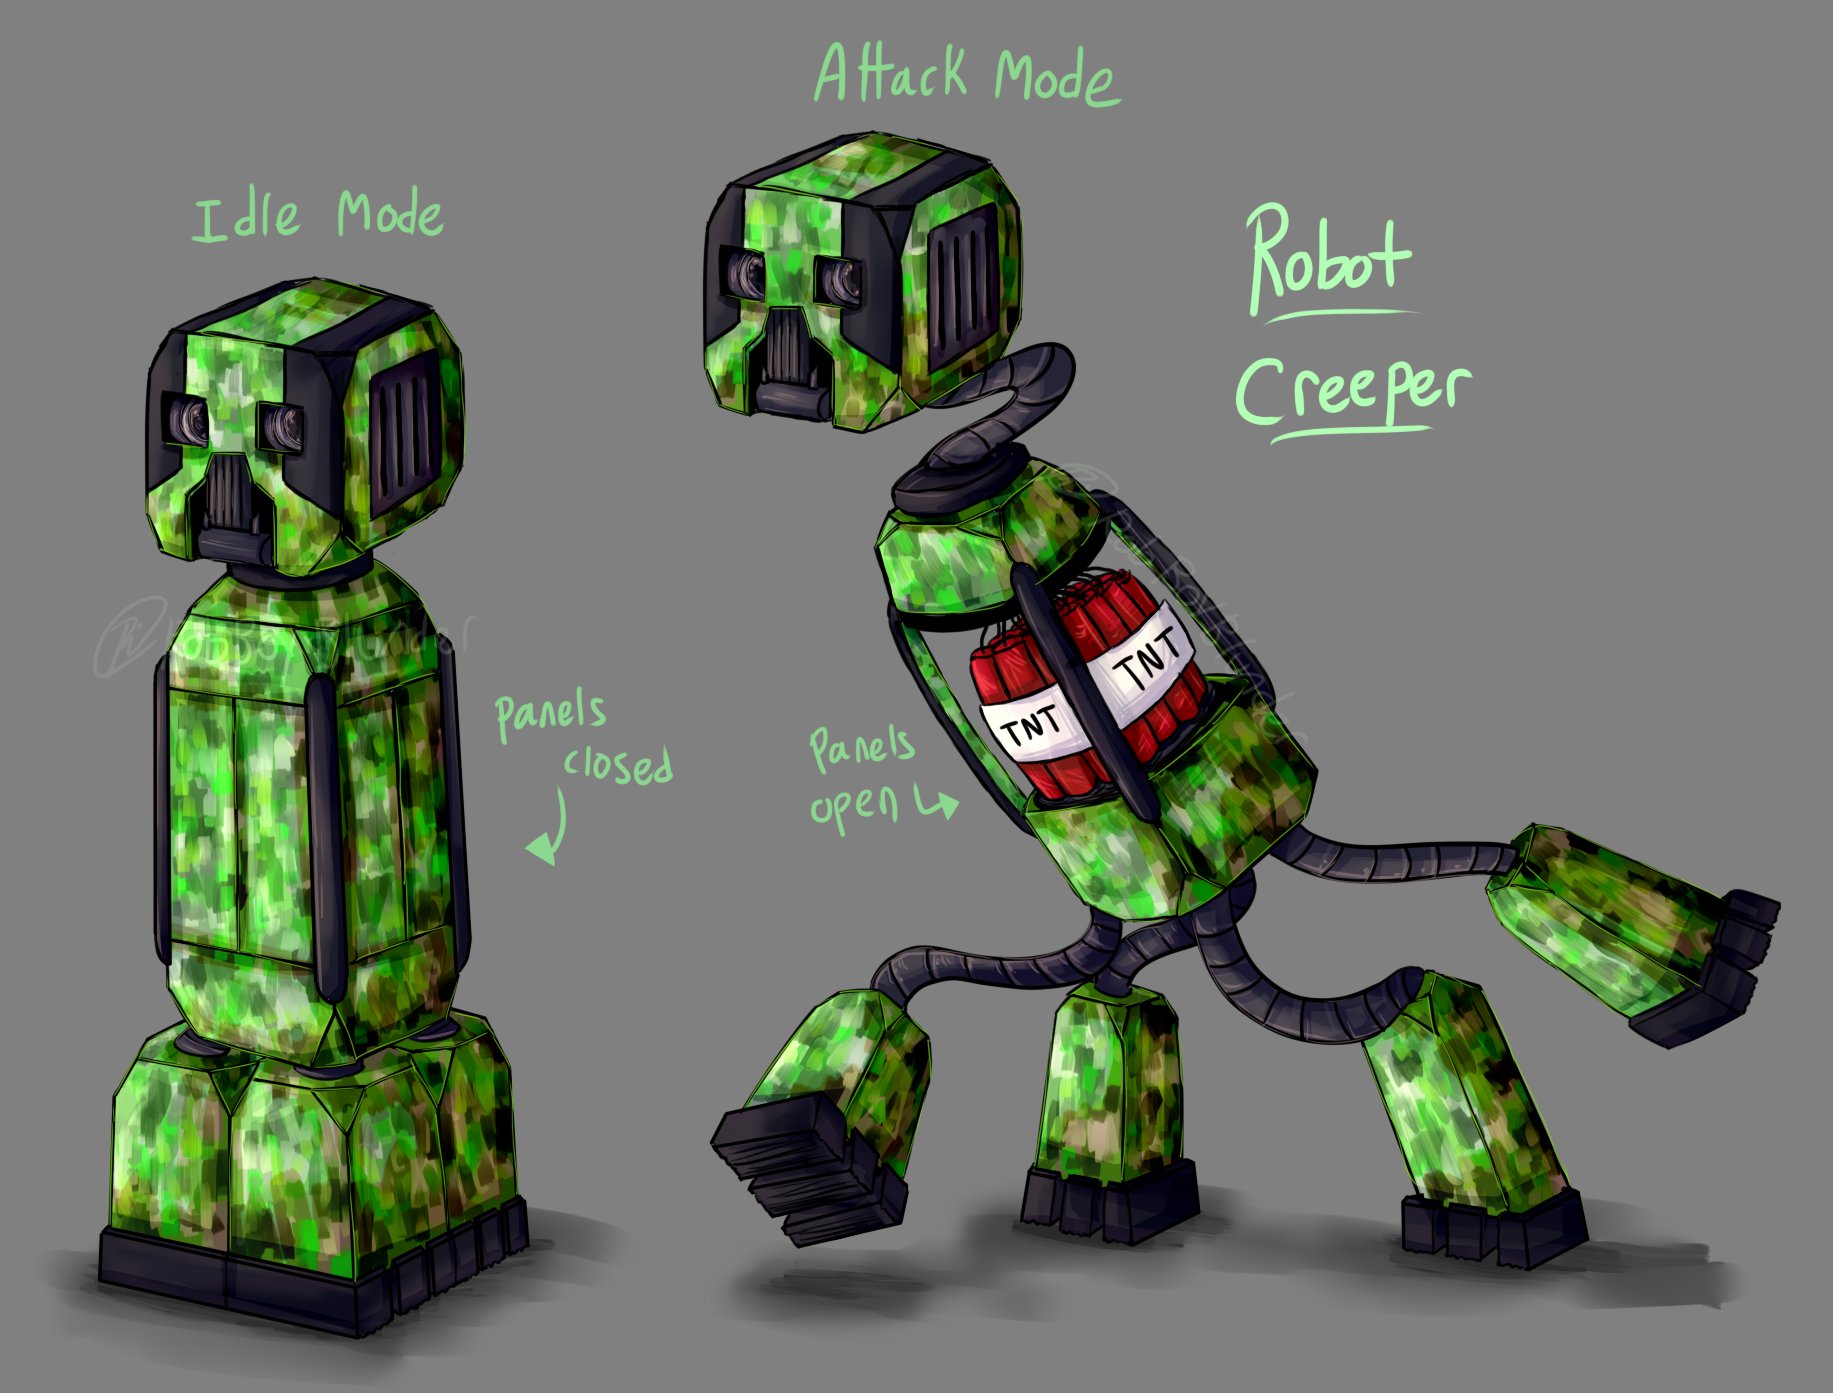 RobBoyBlunder on Twitter: "As I promised forever ago, I did the robot creeper go with my robot enderman! I think the design for this one is fun but the